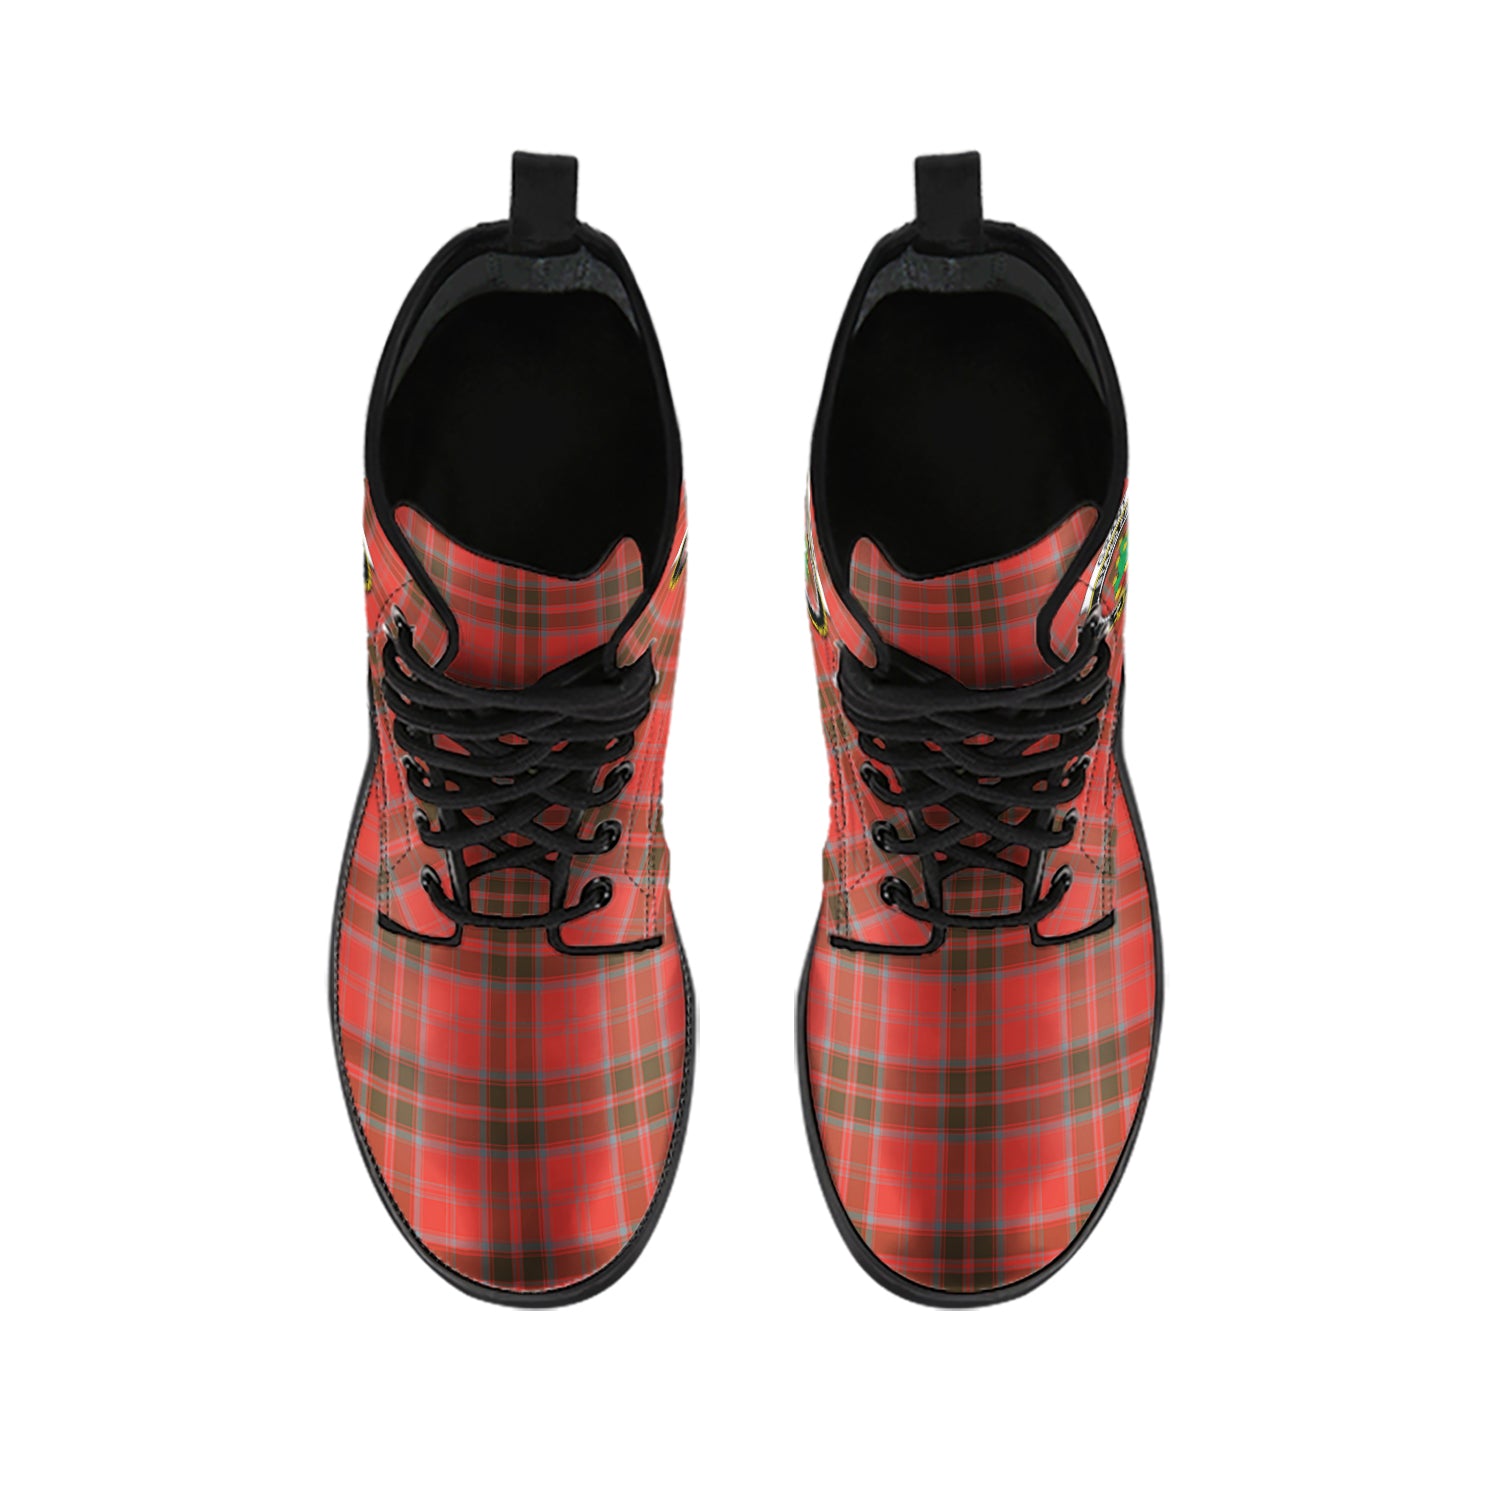 grant-weathered-tartan-leather-boots-with-family-crest